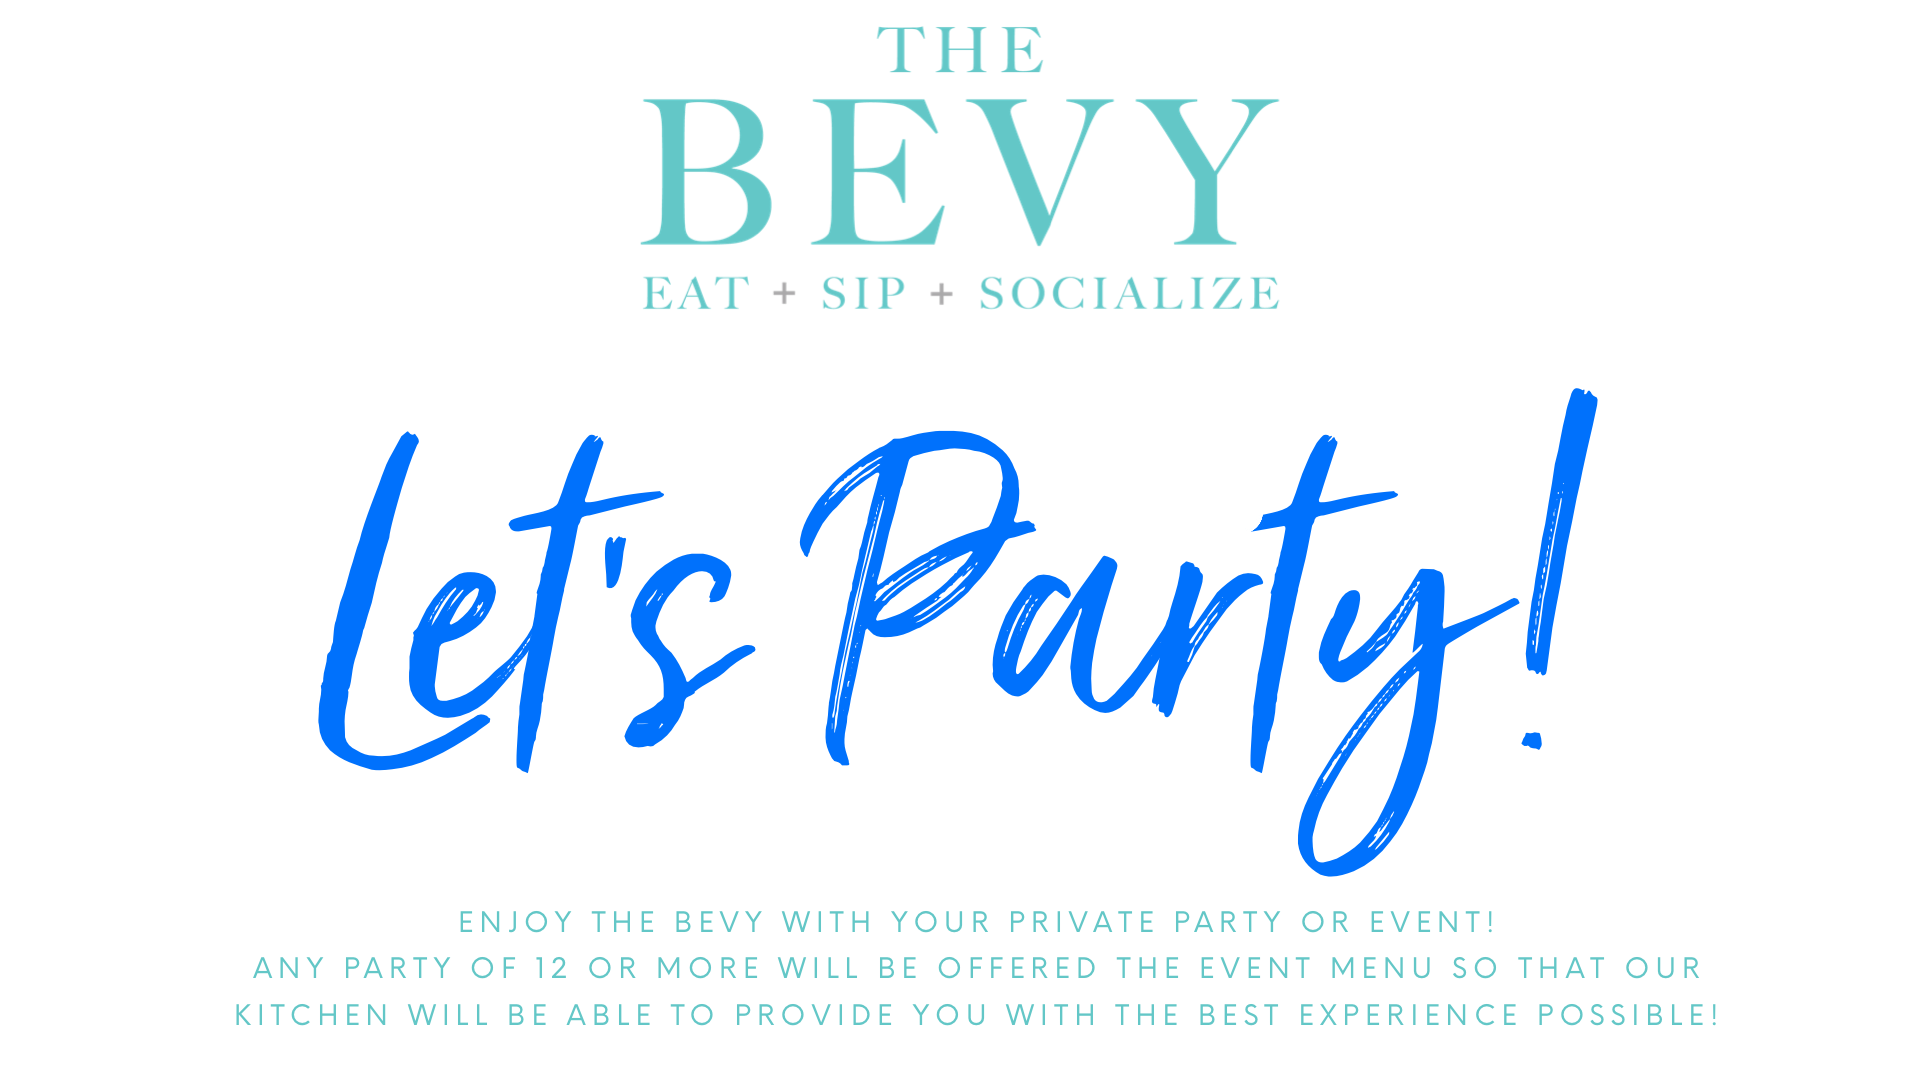 bevy events